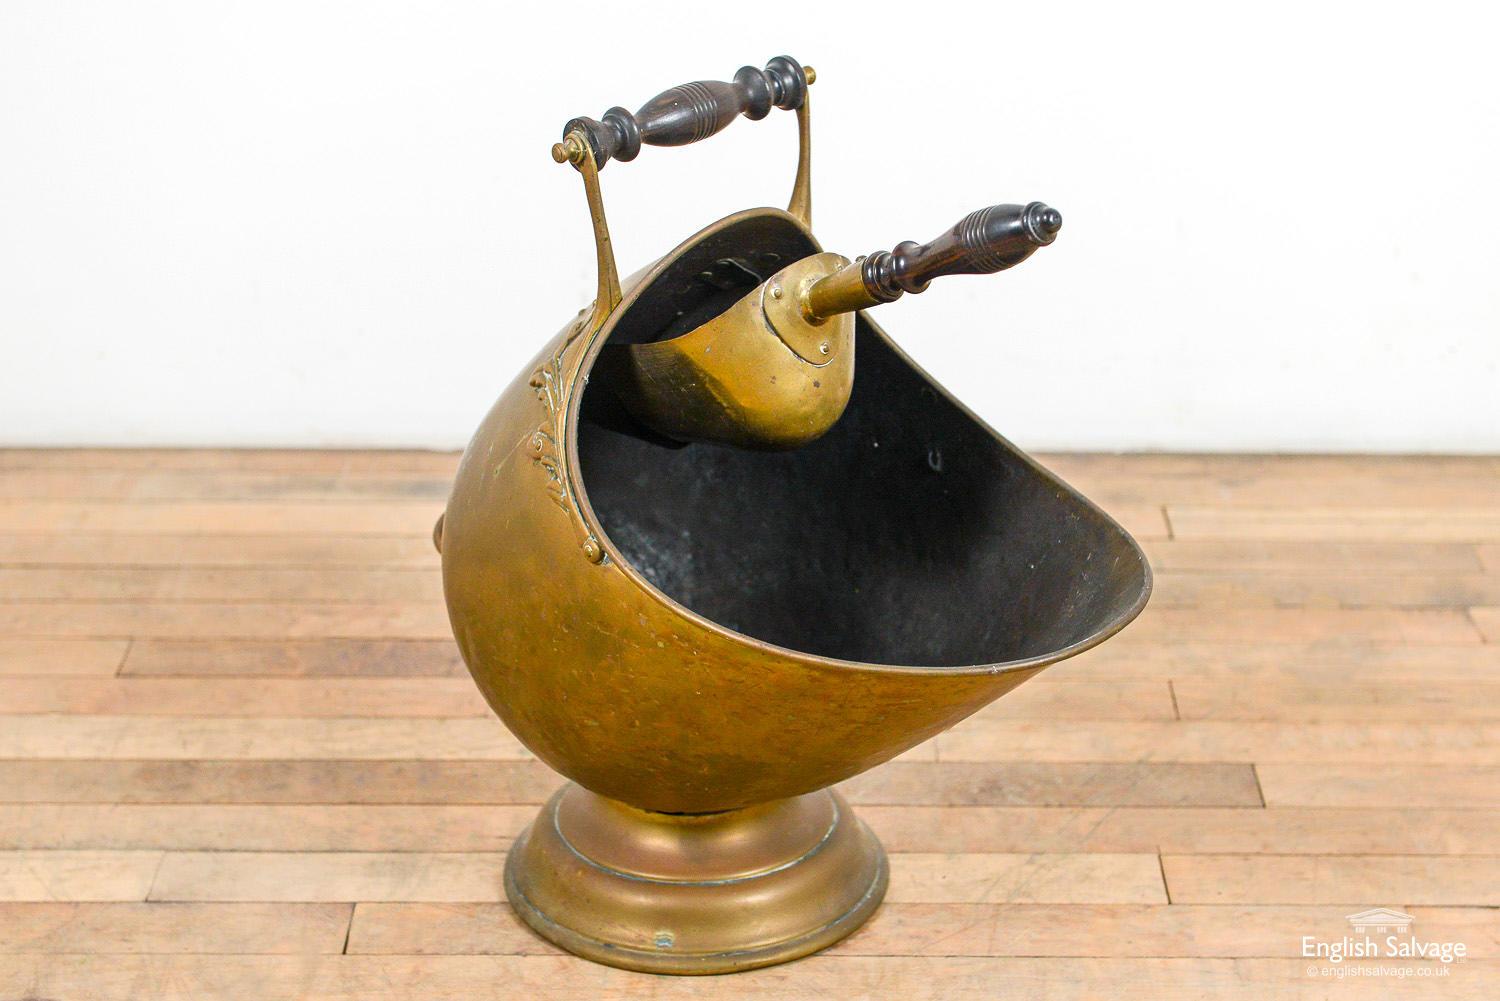 Substantial fireside brass coal bucket with scoop. Turned hardwood handles and decorative floral detail around rim. An unusual find with a lovely patina, and only minor age-related scuffs and dinks.